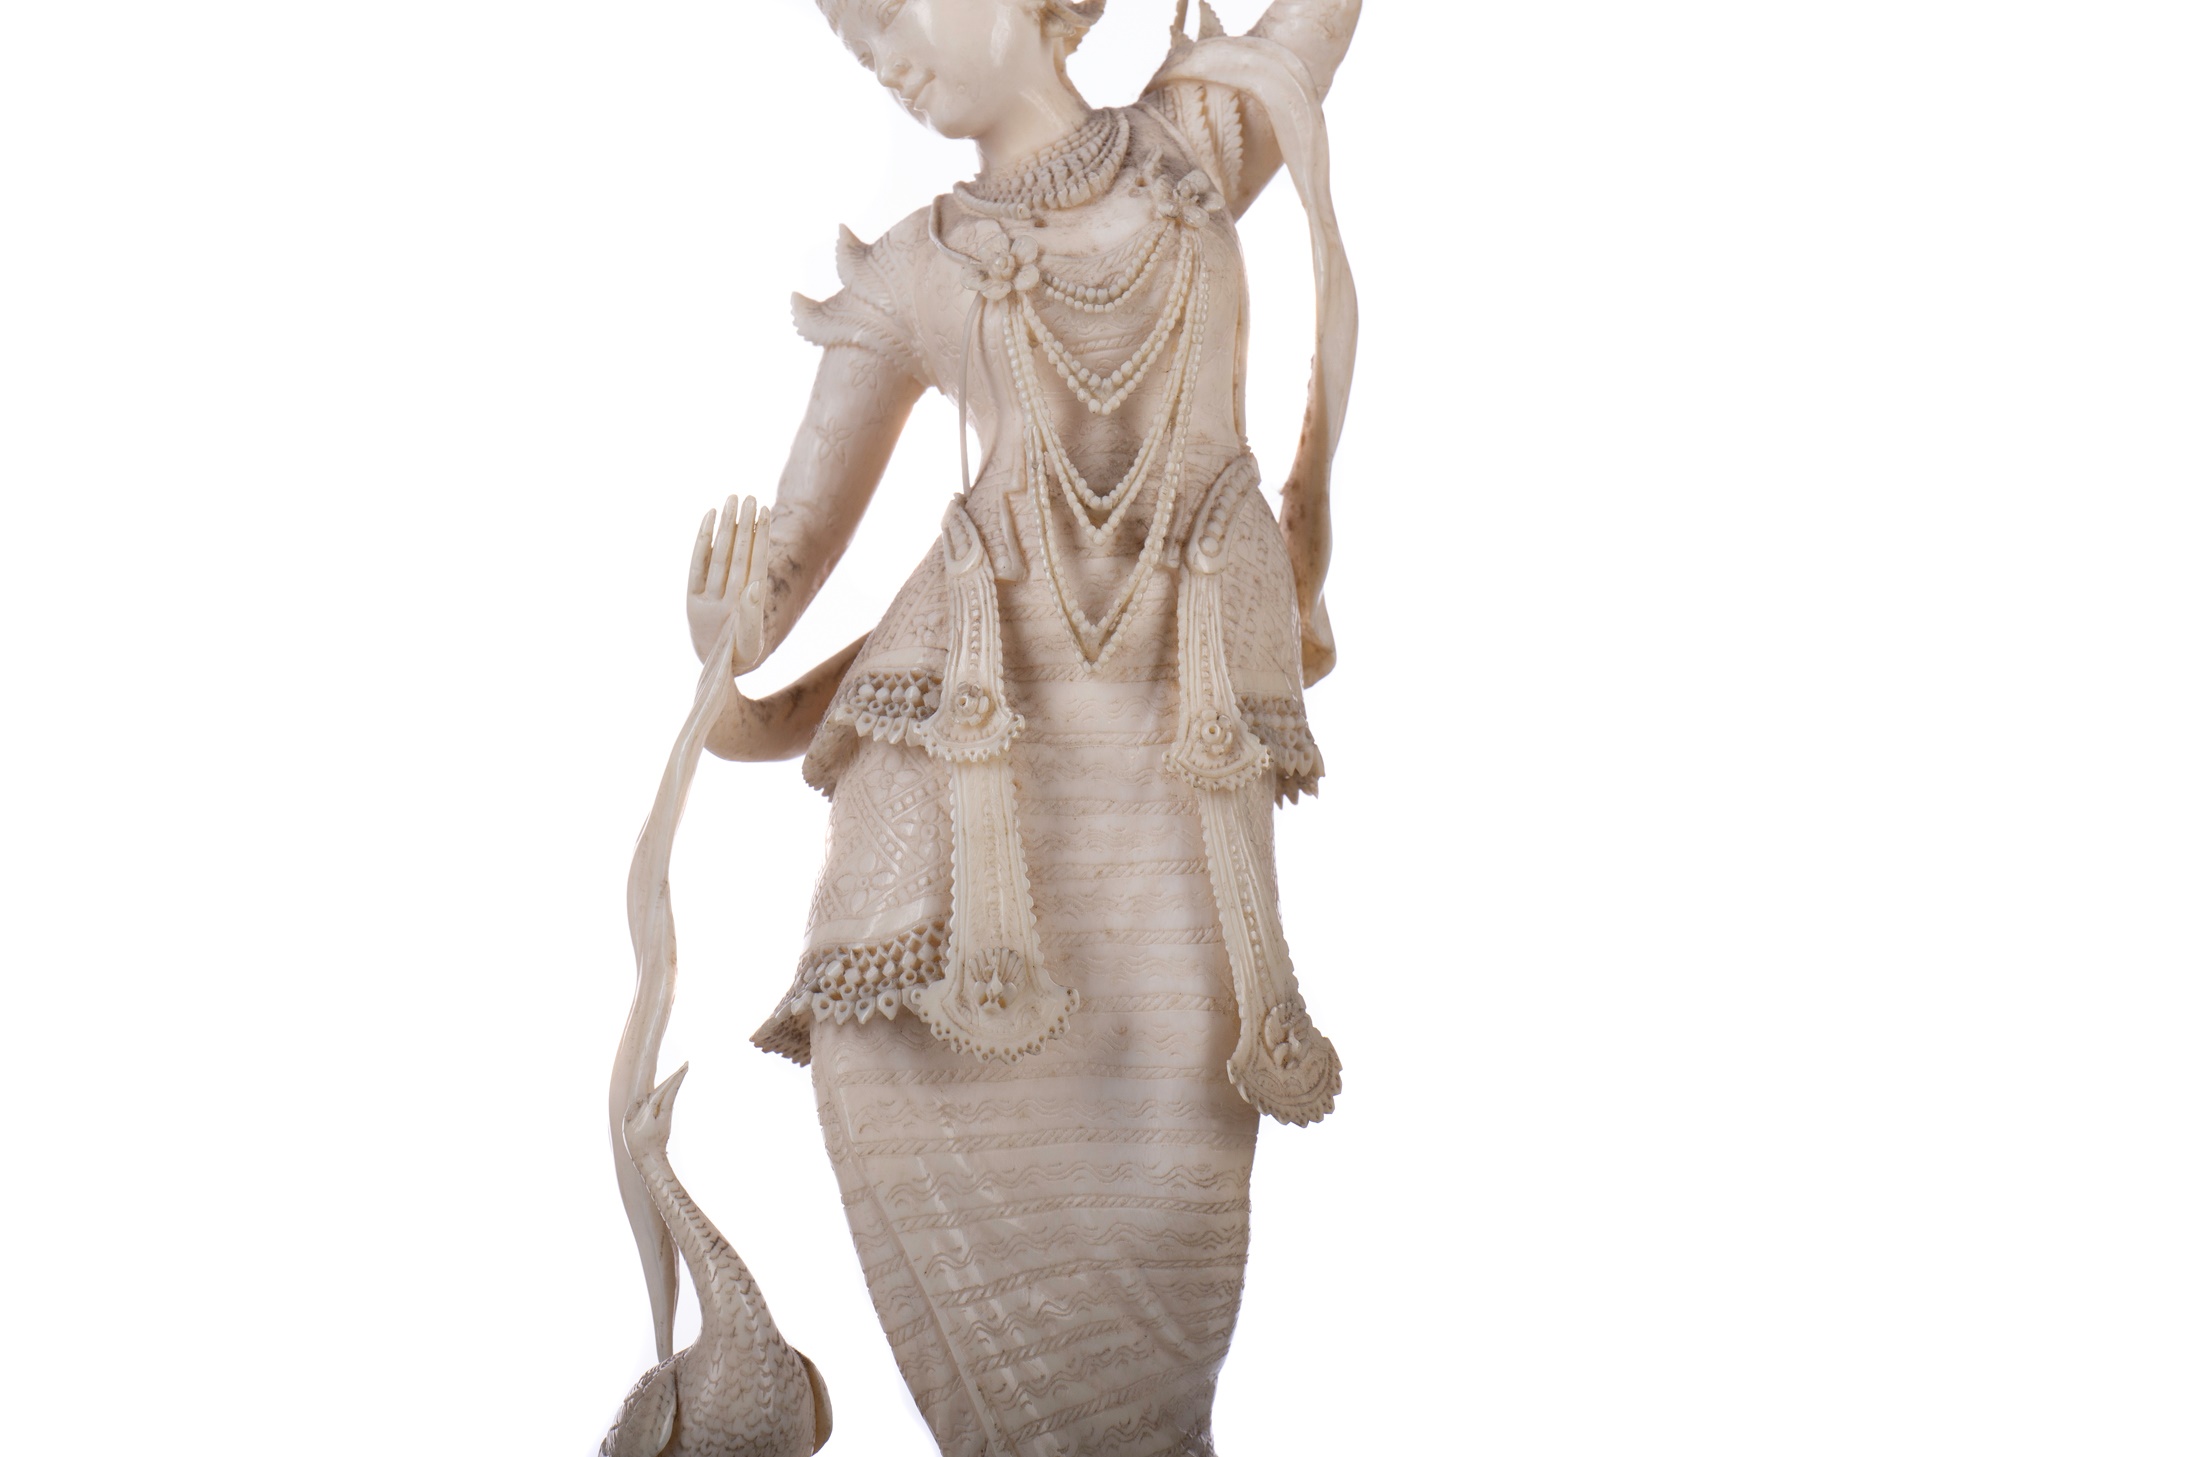 INDIAN IVORY CARVING OF SHIVA - Image 4 of 4